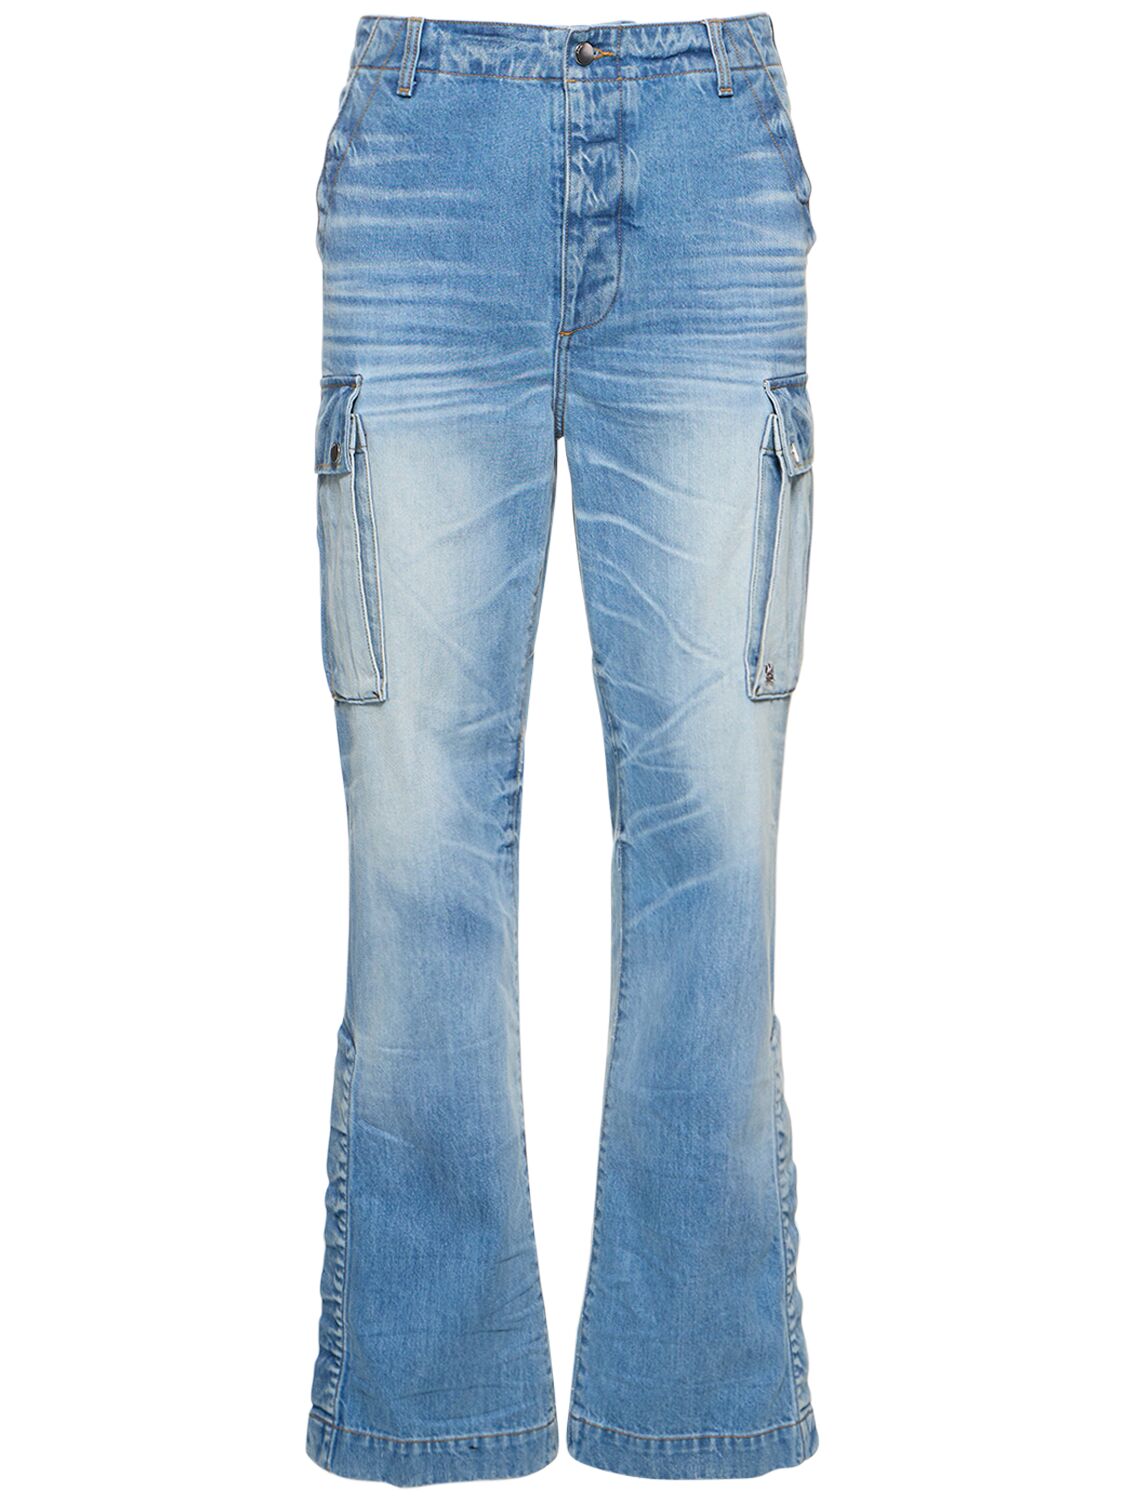 Image of M65 Cargo Kick Flare Cotton Jeans